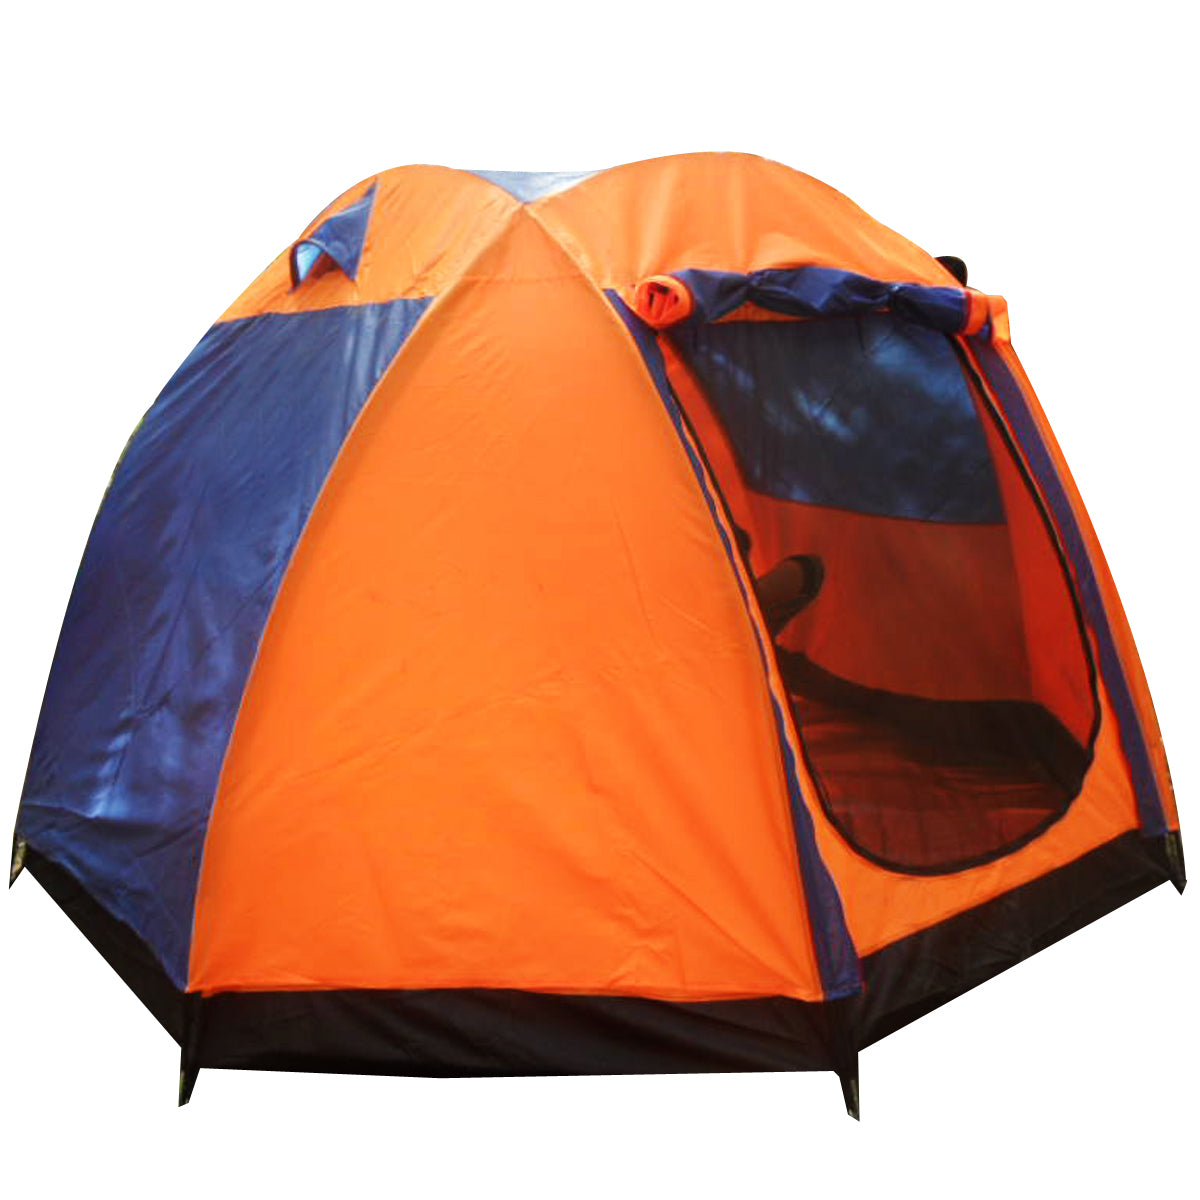 Outdoor 5-6 People Large Tent Waterproof Double Layer Family Canopy Sunshade Outdoor Camping